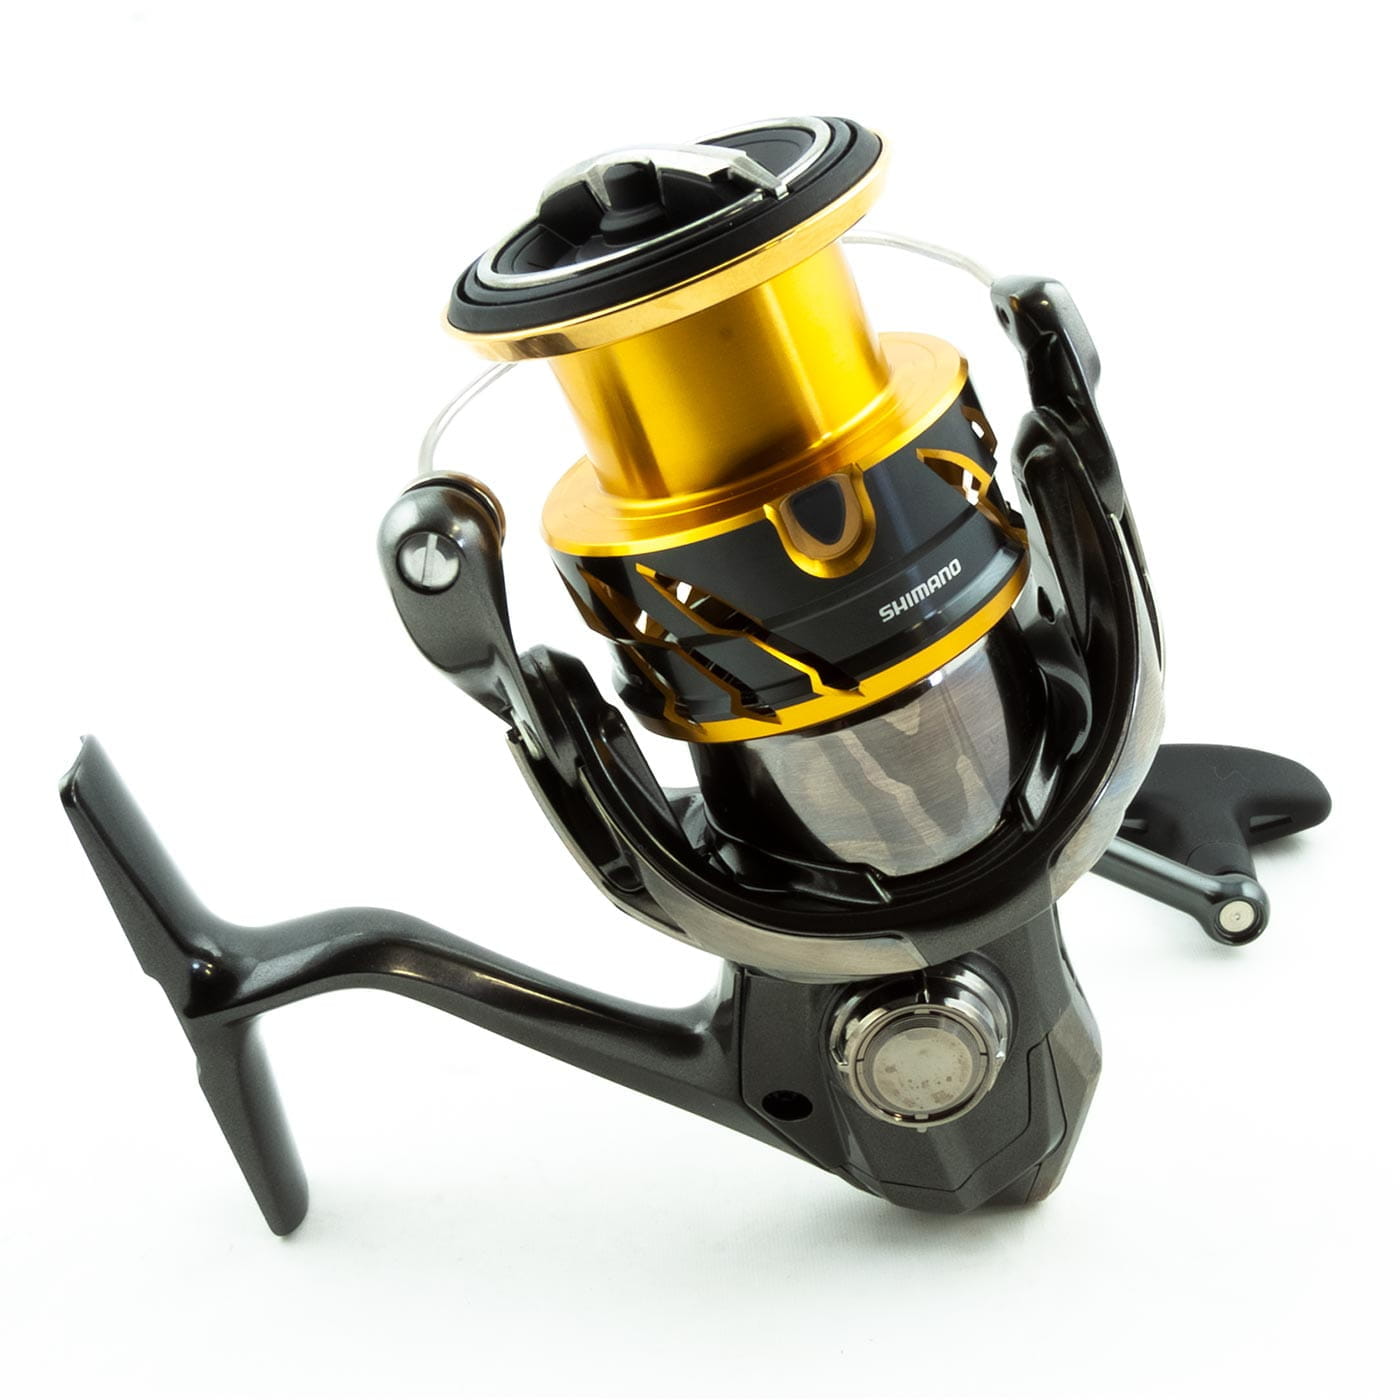 ✨✨✨SHIMANO TWINPOWER SW PG LIMITED EDITION SPINNING REEL✨✨✨